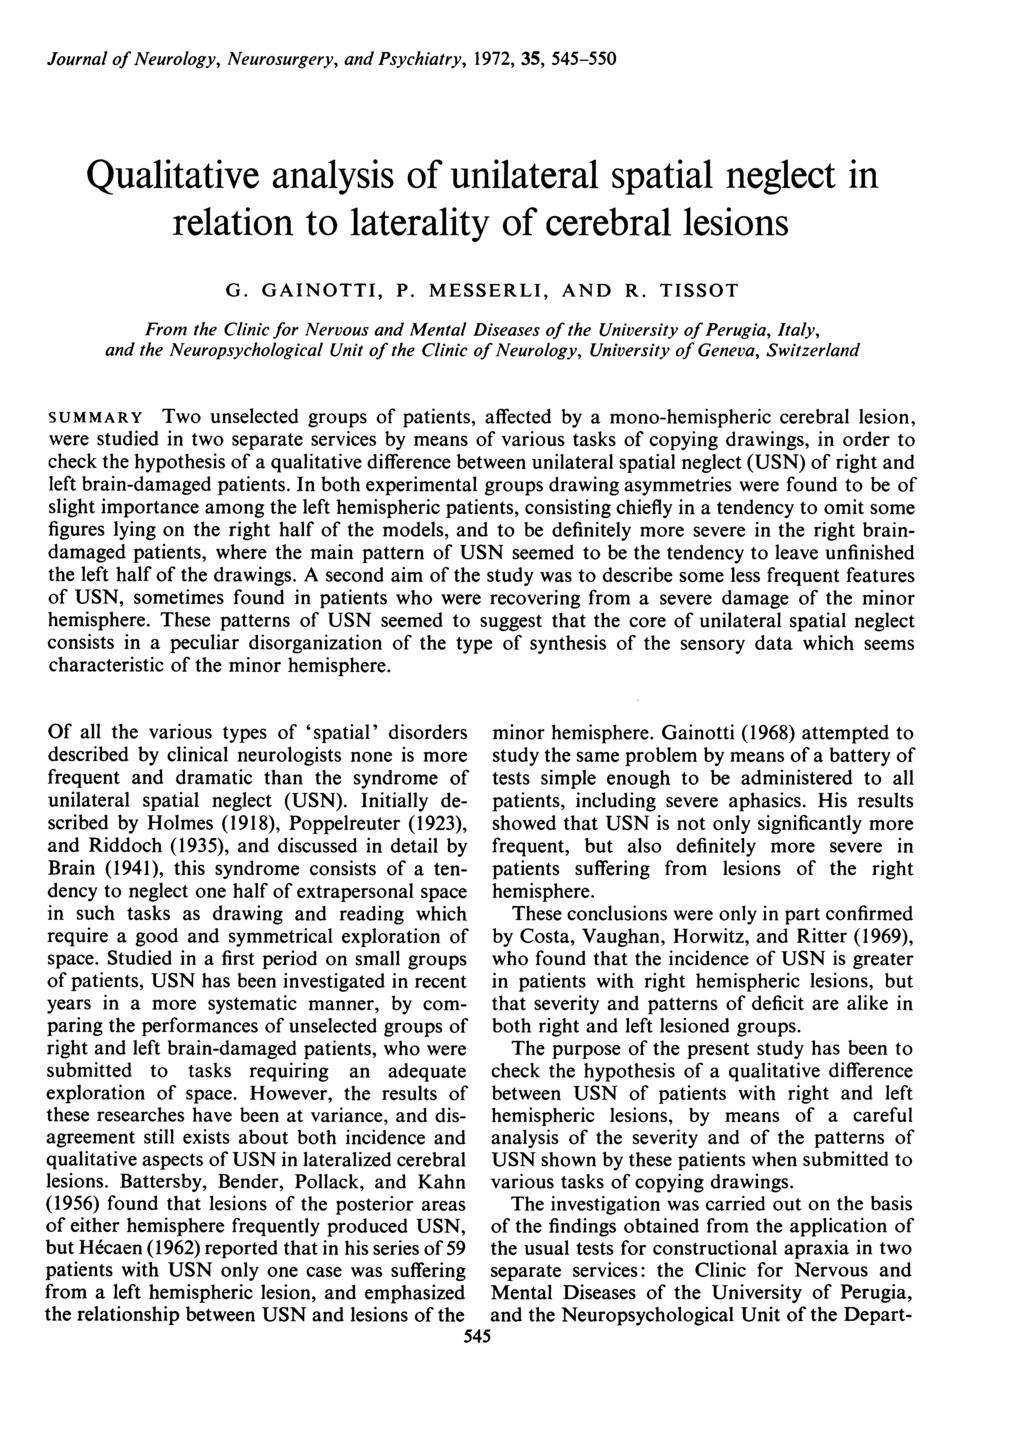 Journal of Neurology, Neurosurgery, and Psychiatry, 1972, 35, 545-550 Qualitative analysis of unilateral spatial neglect in relation to laterality of cerebral lesions G. GAINOTTI, P. MESSERLI, AND R.